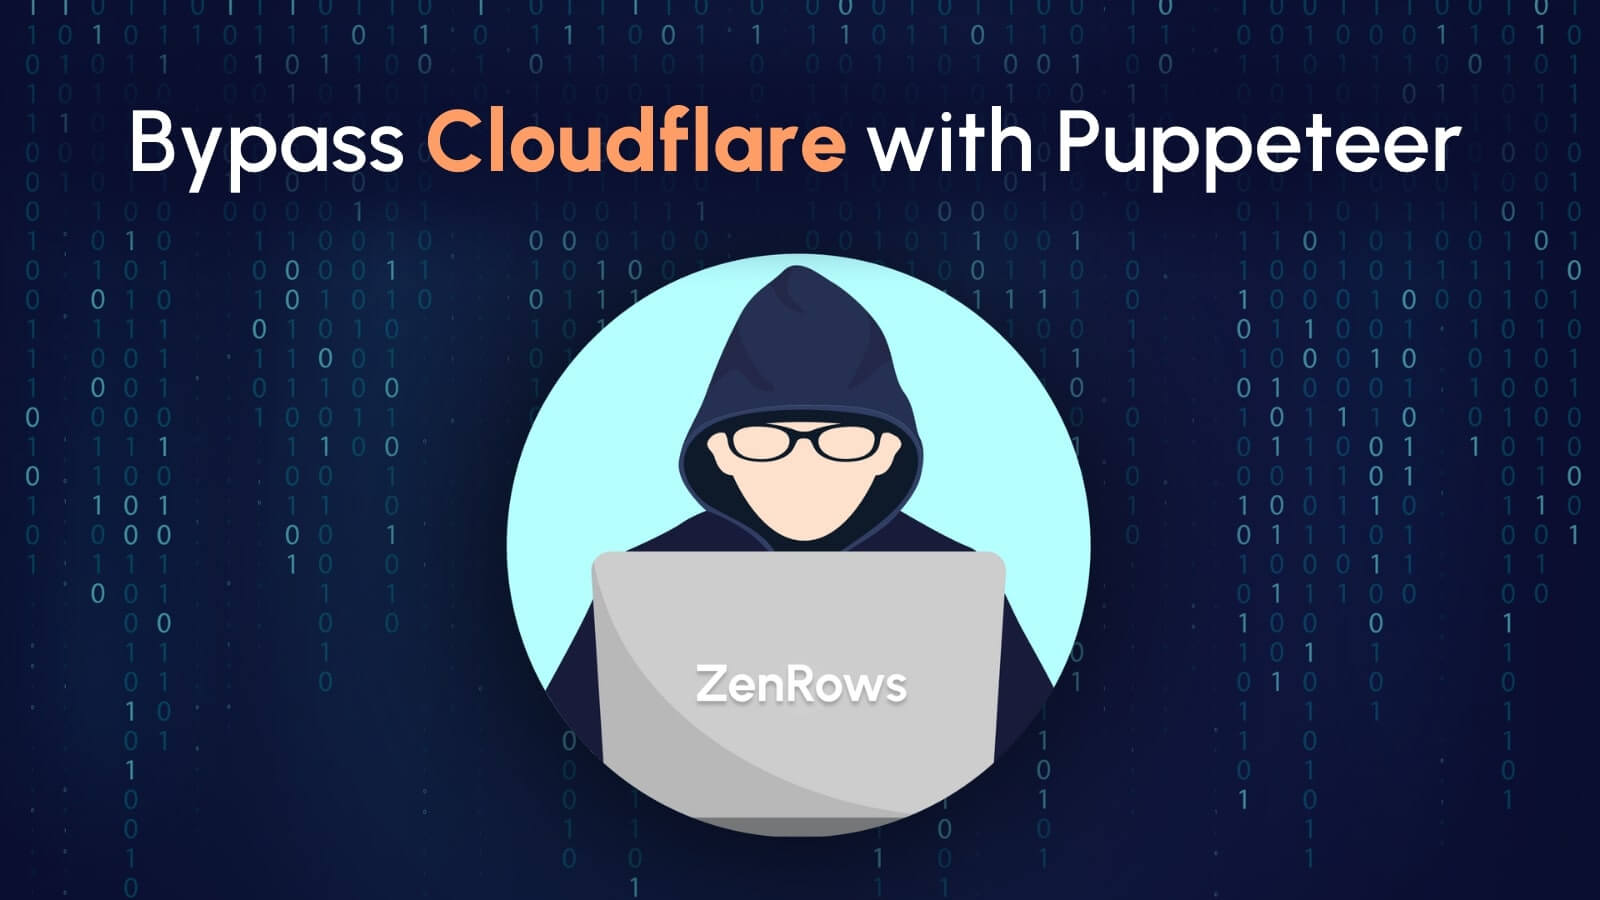 How to Bypass Cloudflare with Puppeteer